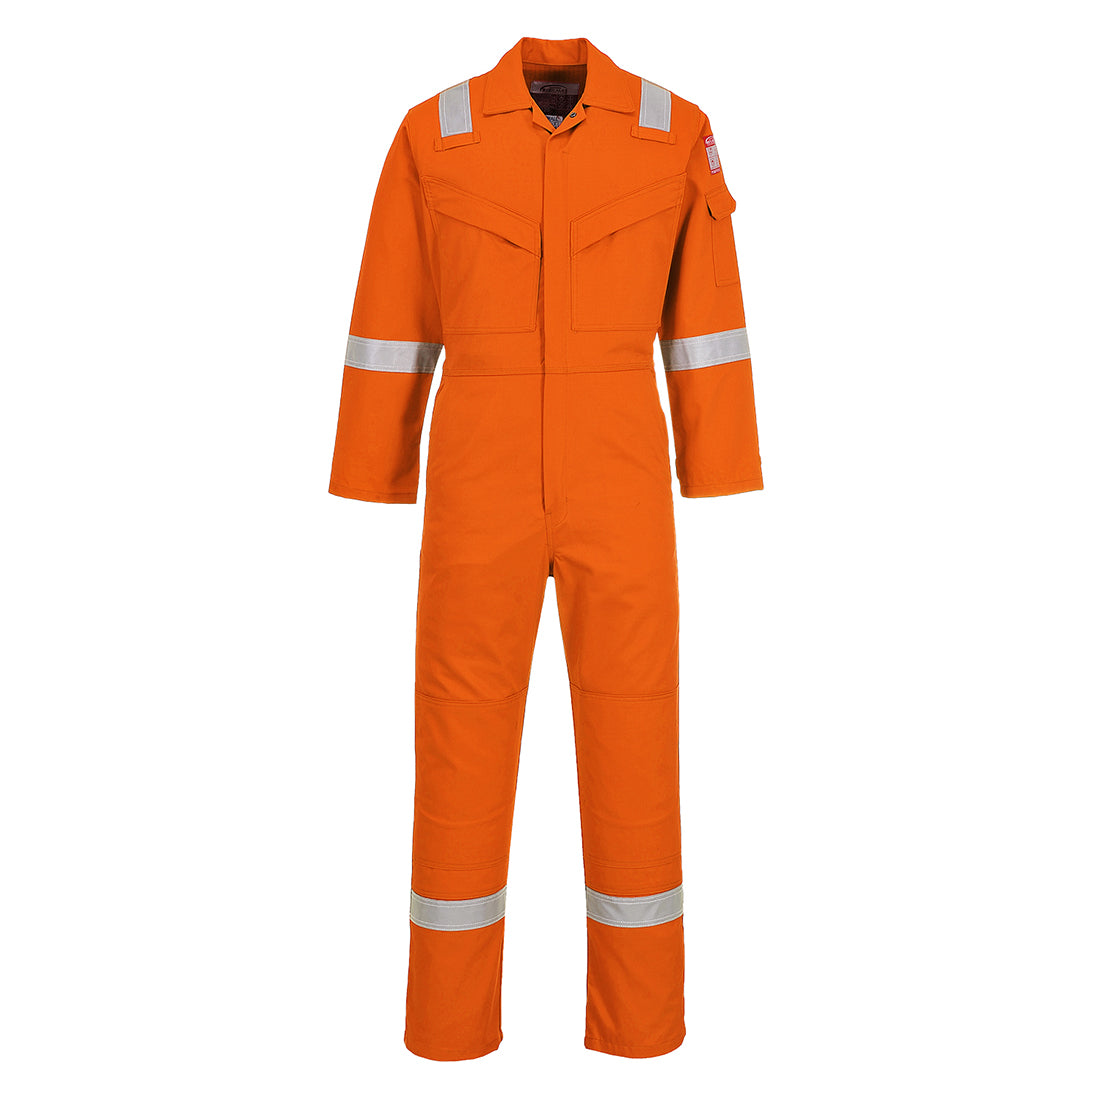 Portwest FR50 Orange Sz L Tall Flame Resistant Anti-Static Boiler Suit Coverall Overall